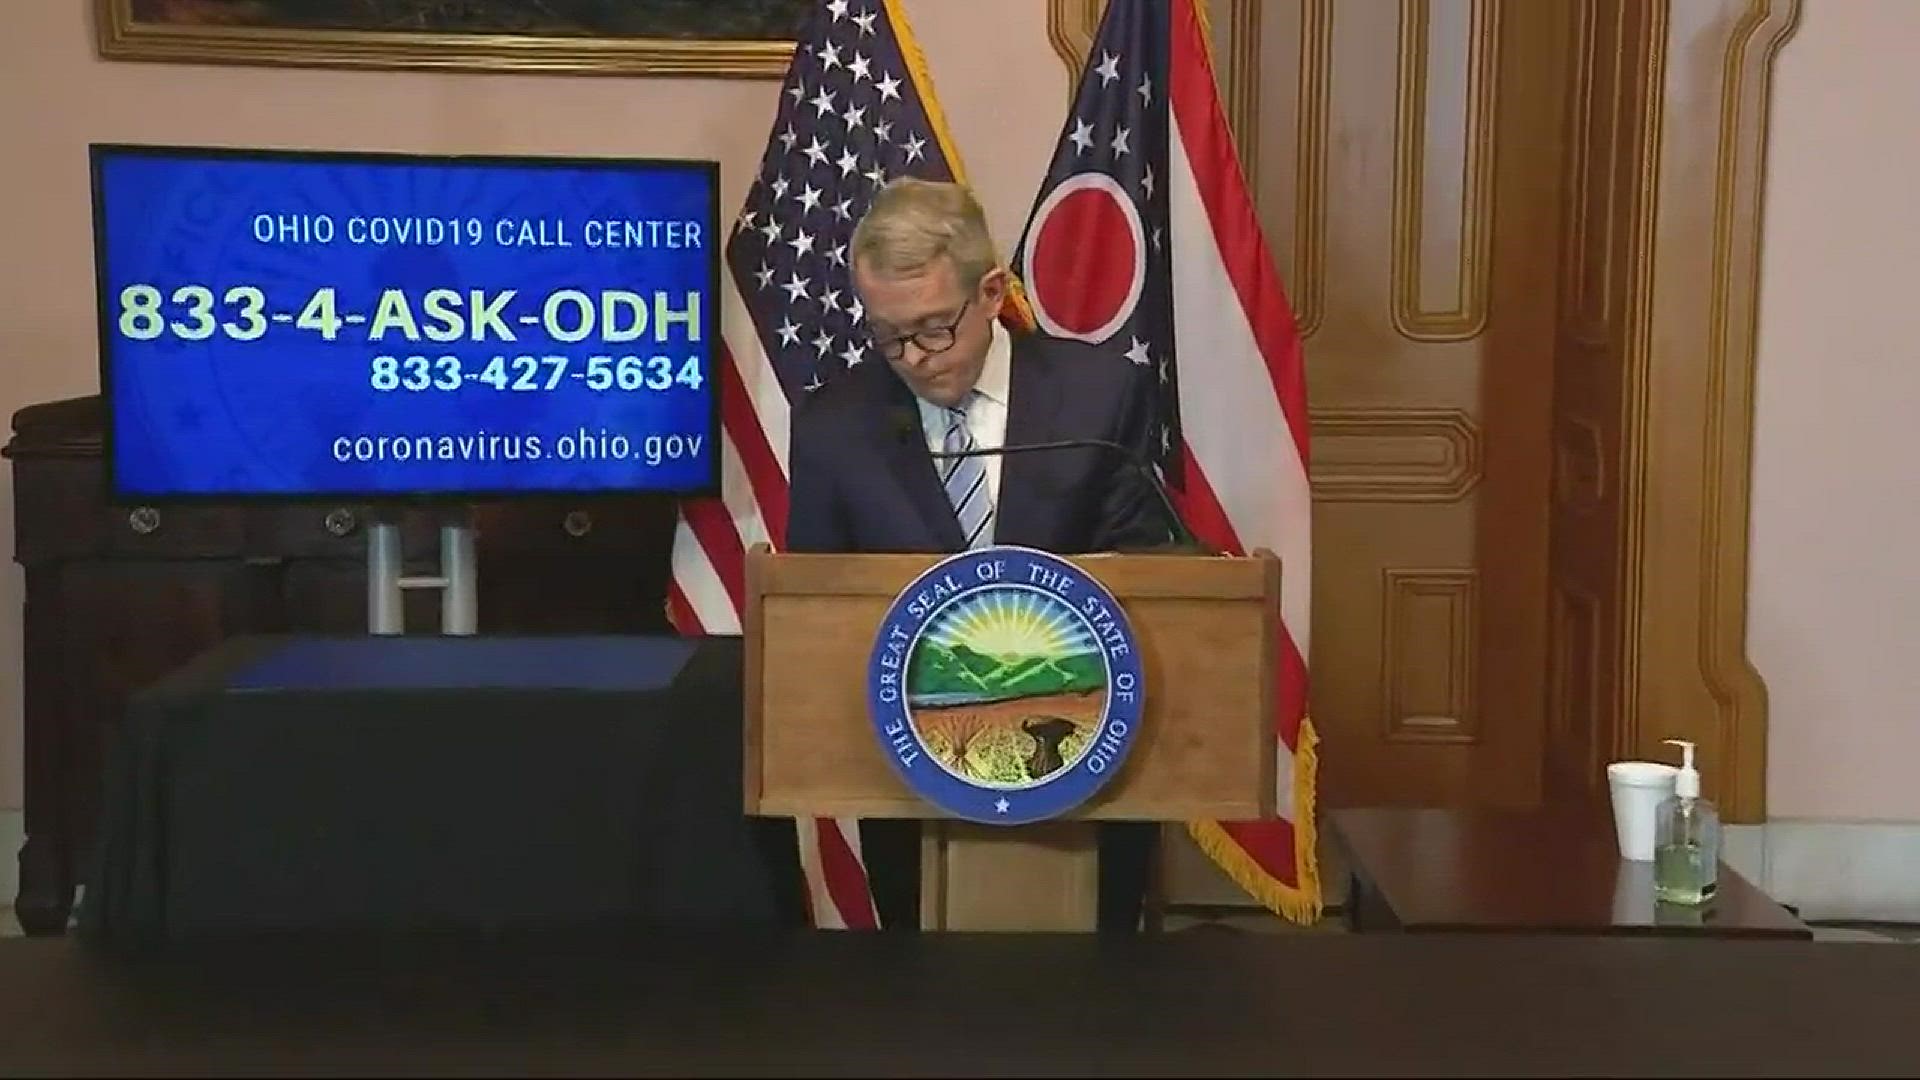 Gov. DeWine pushed the FDA to approve and expand Battelle's ability to sterilize masks on a press briefing Sunday. The governor said he expects a decision today.